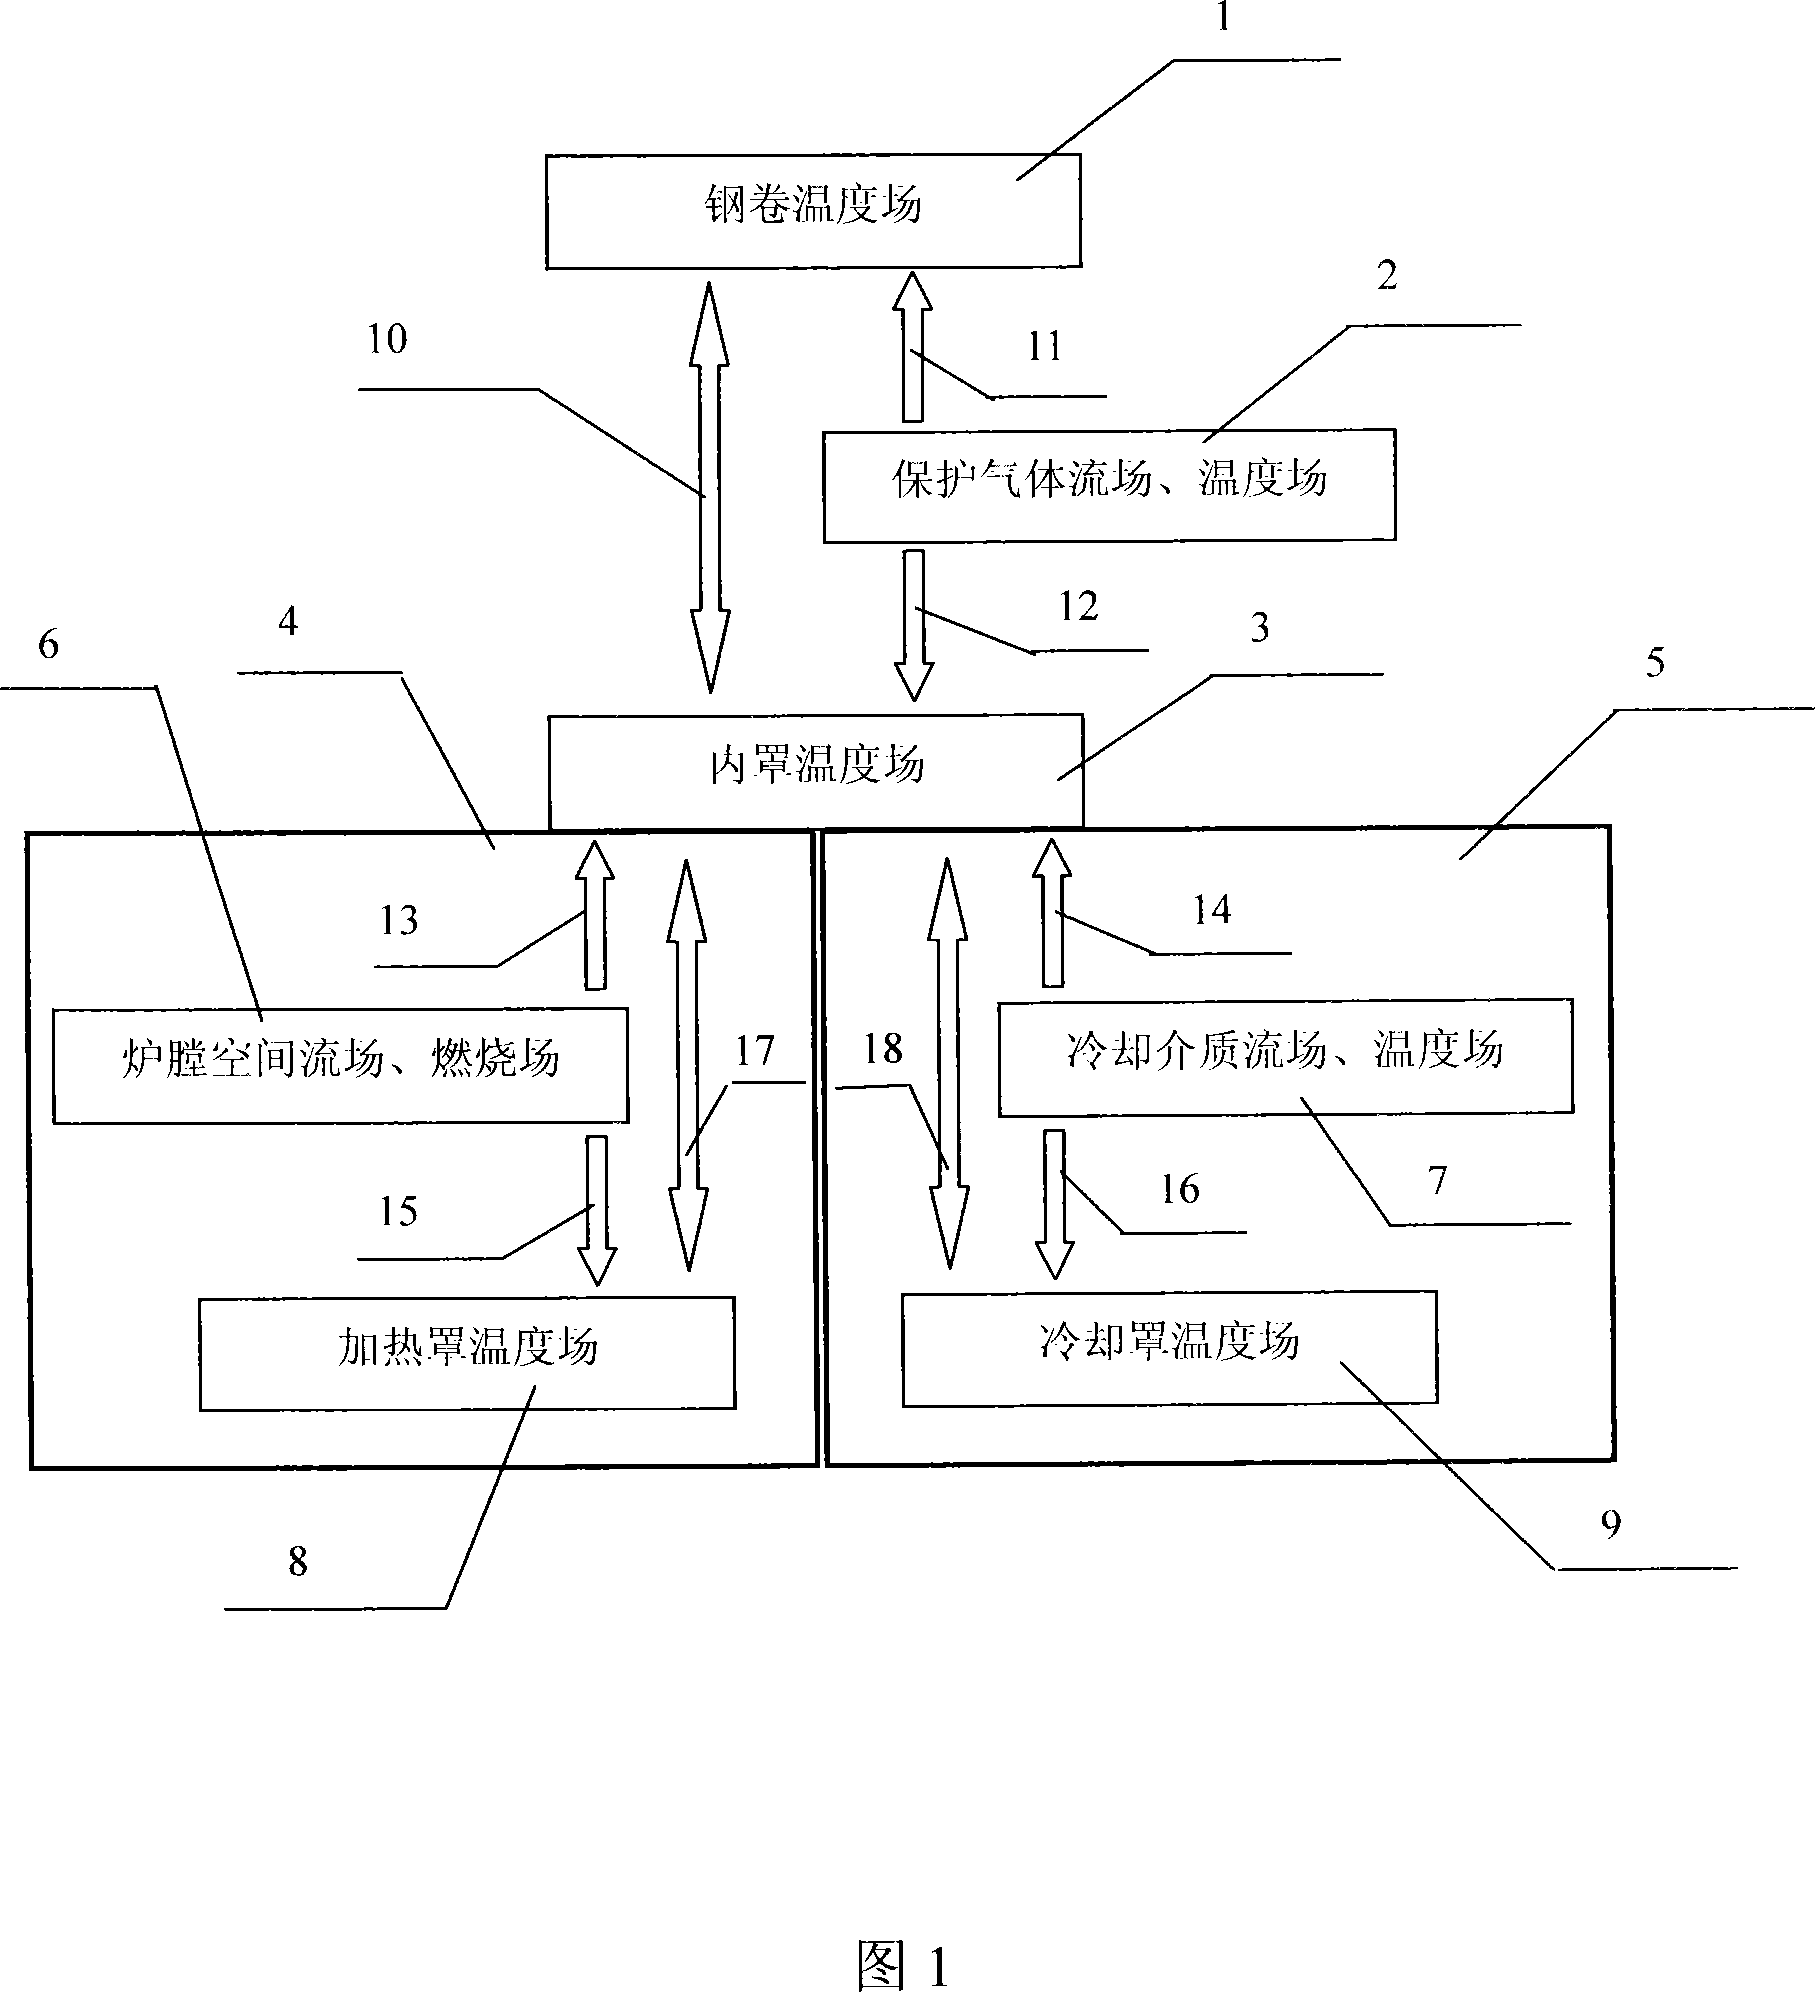 Off-line prediction method for bell-type furnace steel roll annealing process